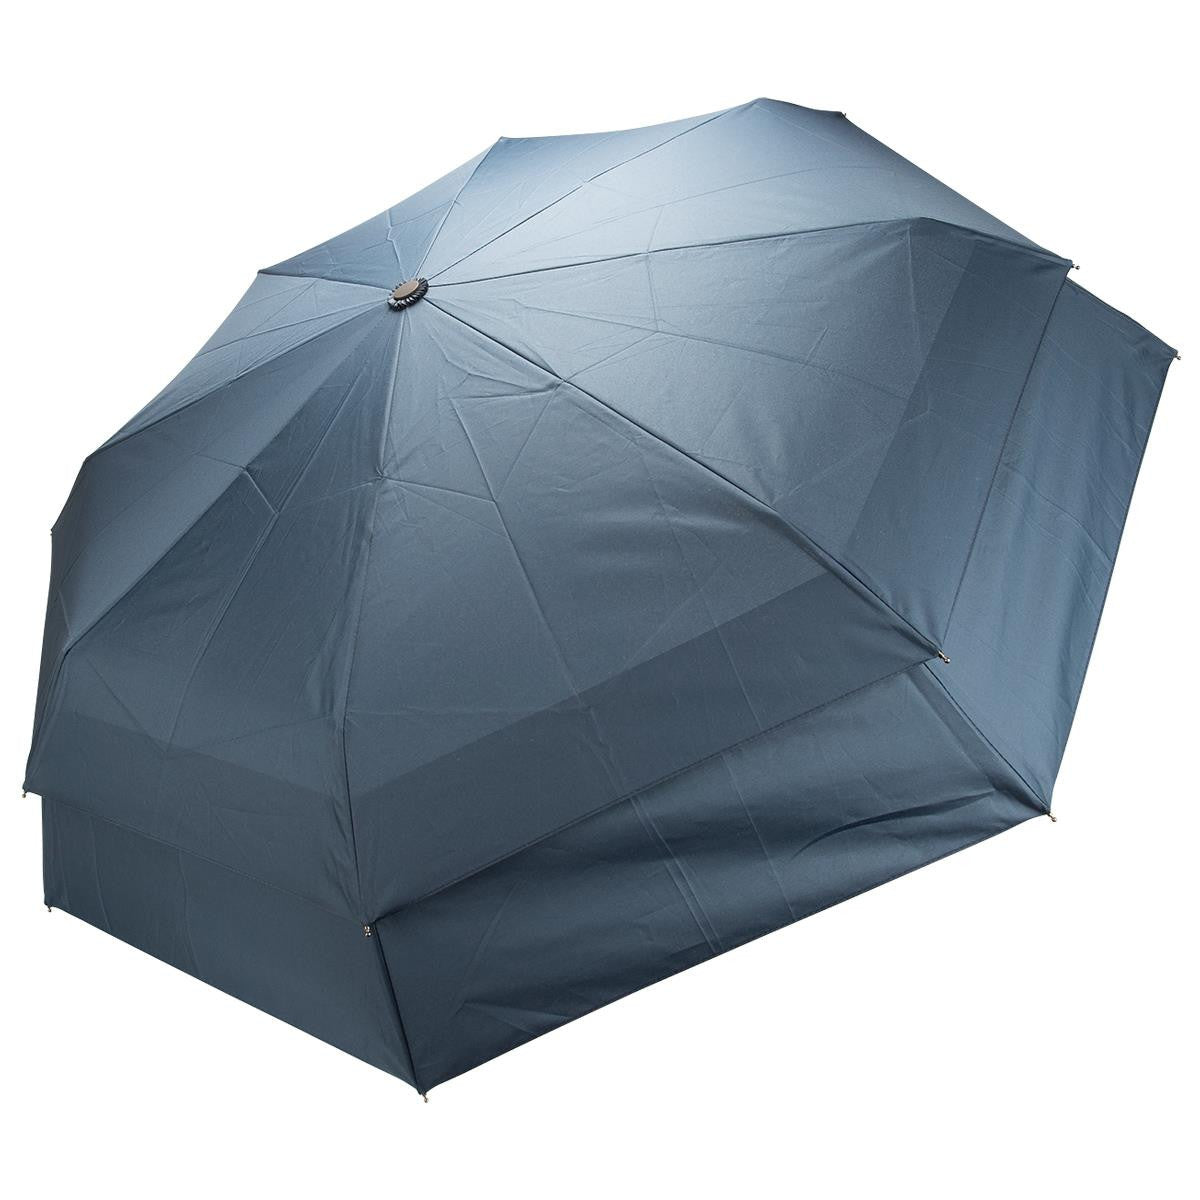 UMBRA®️ ULTIMATE COMPACT - Heavy Duty Wind-Rated Compact Umbrella With Double Layer Wind/Vent System & Superior ULTIMATE™ Fibreglass Rib Frame, Smart Auto Open & Close